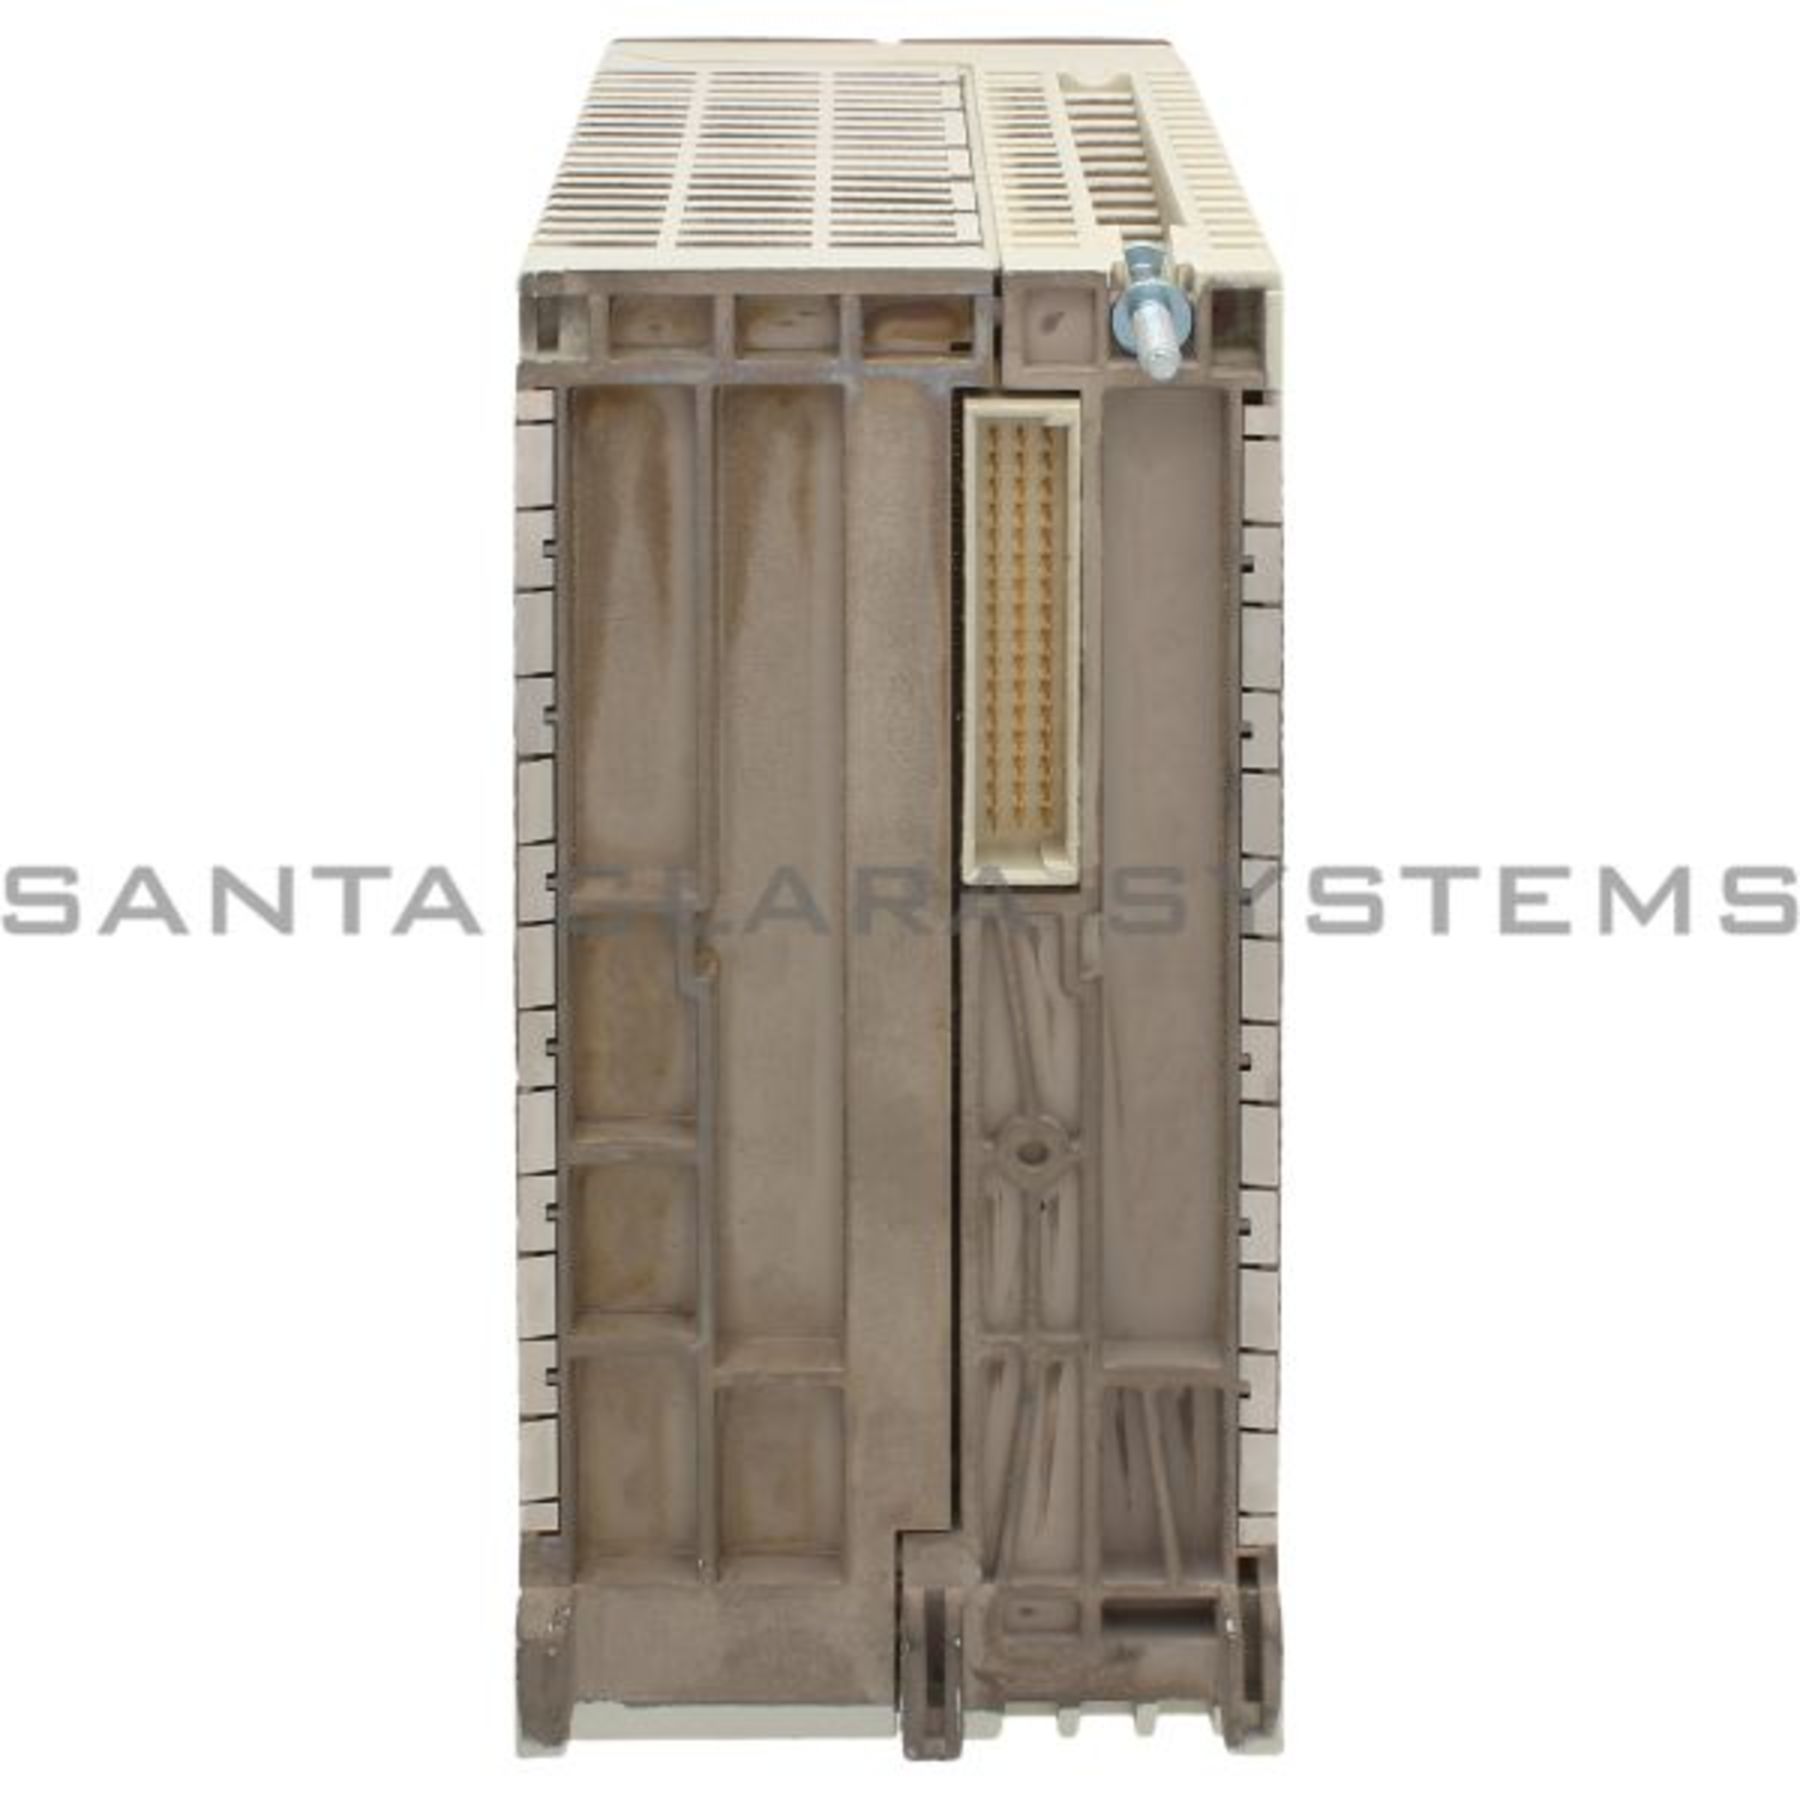 Tsxp573m Telemecanique In Stock And Ready To Ship Santa Clara Systems